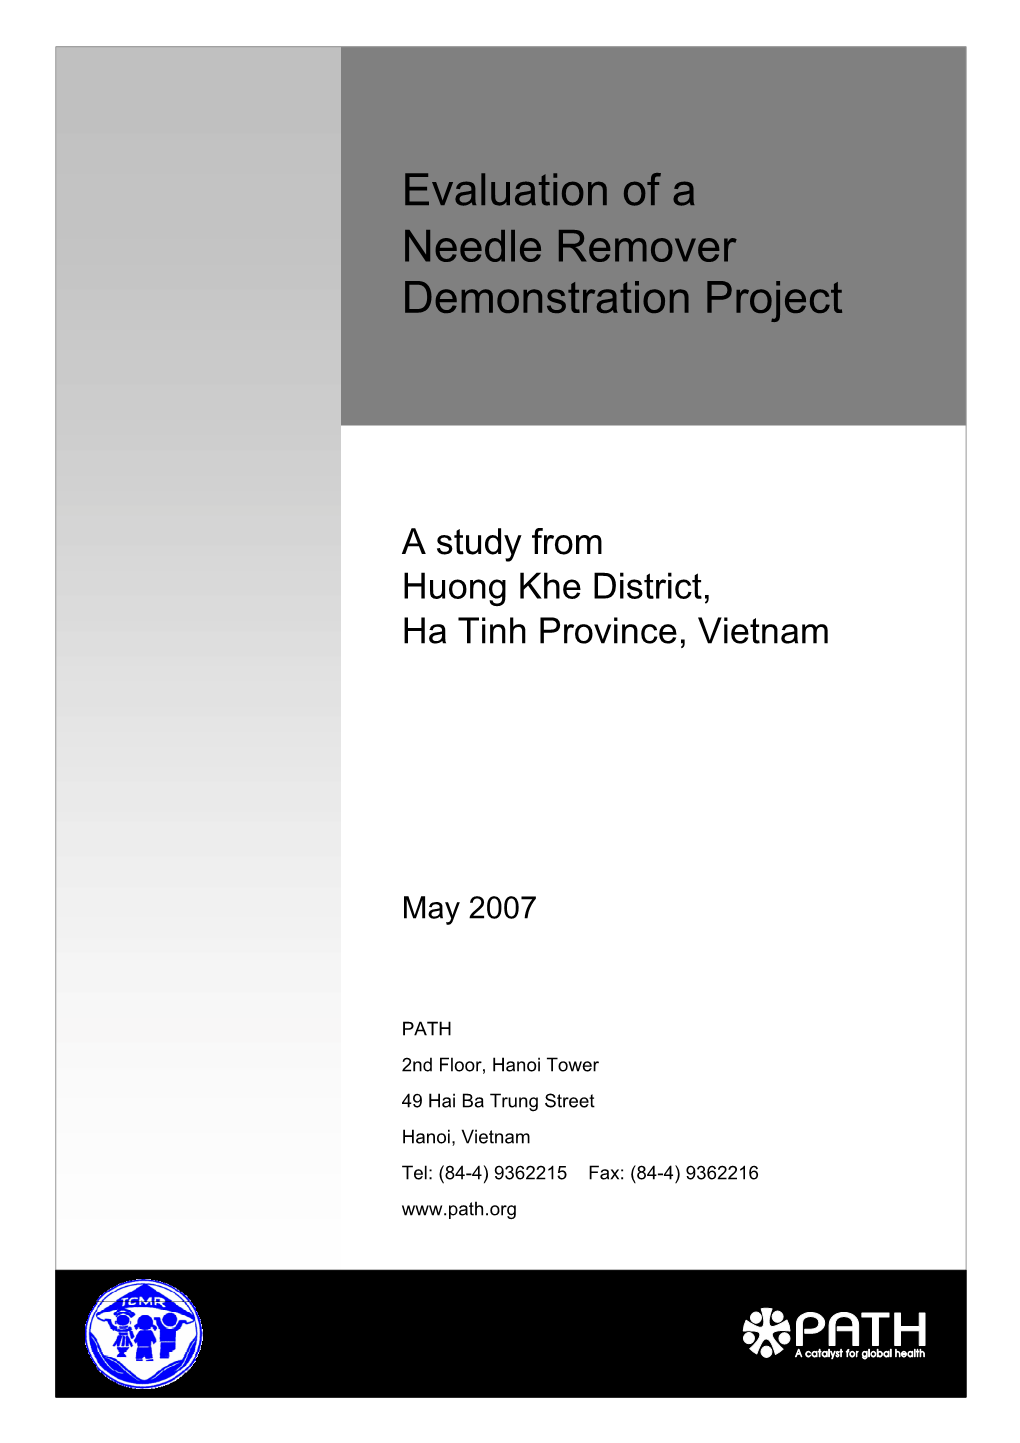 Evaluation of a Needle Remover Demonstration Project: a Study From